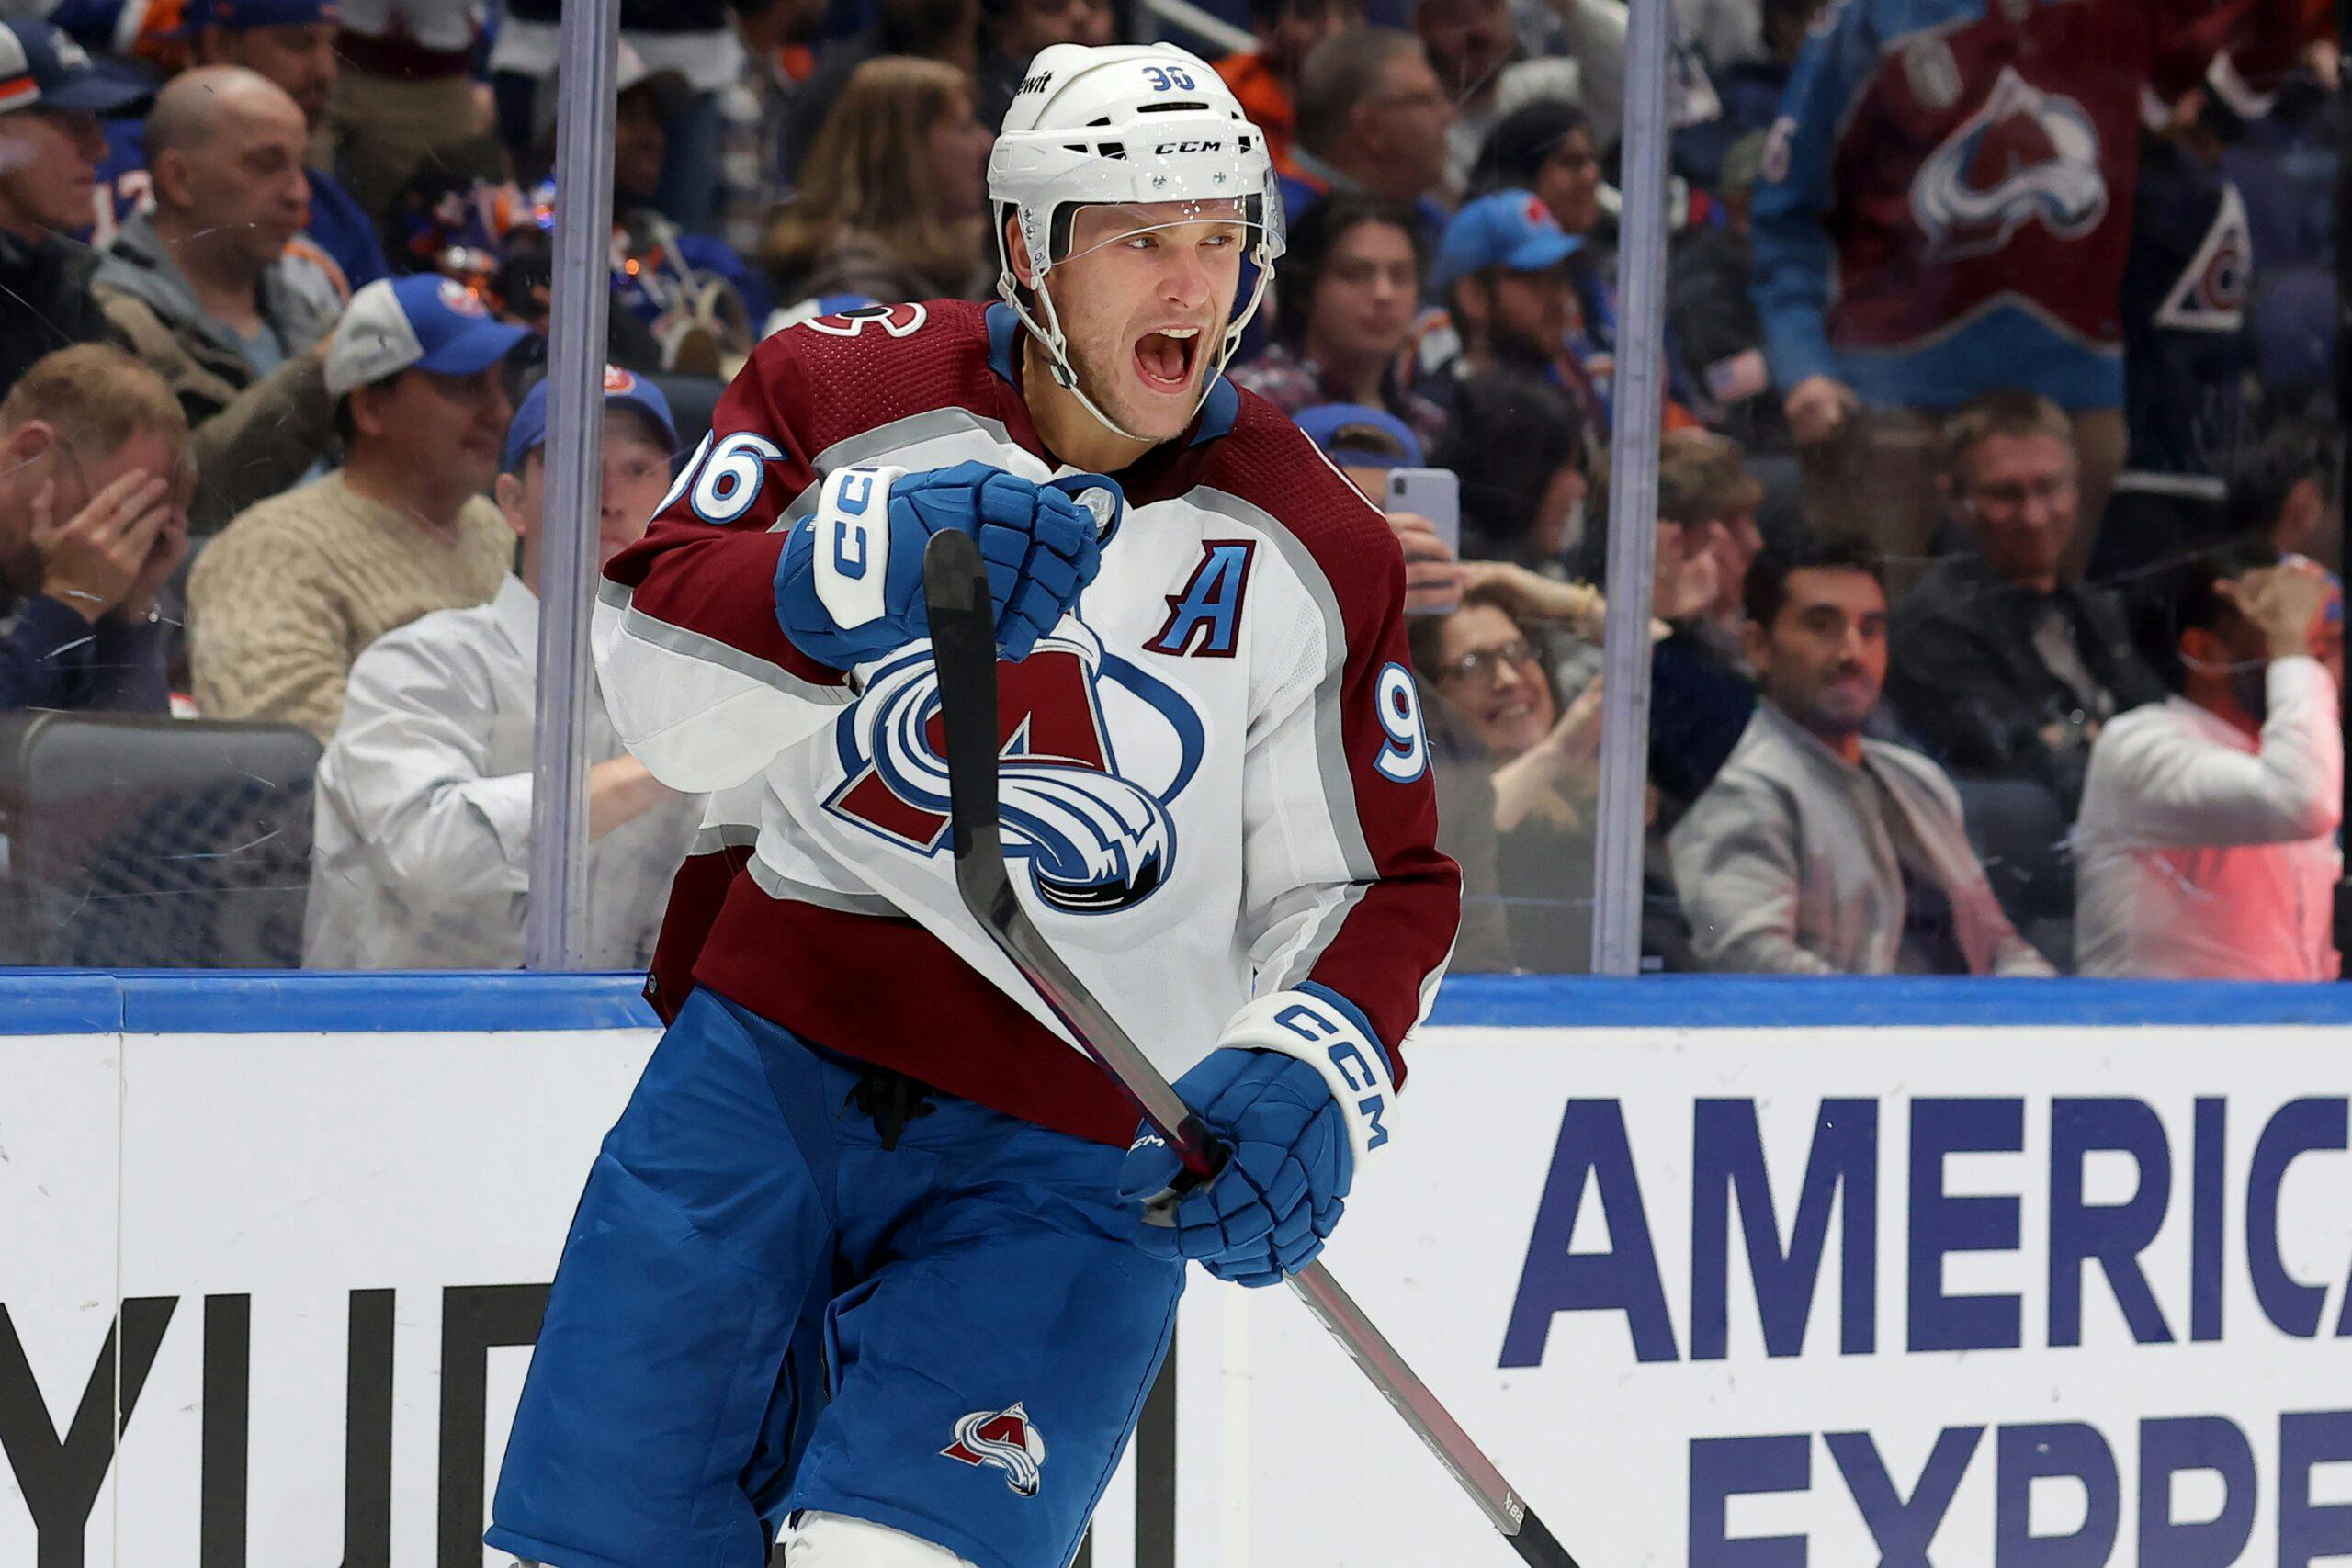 Colorado Avalanche: A Look at the Team's Top 6